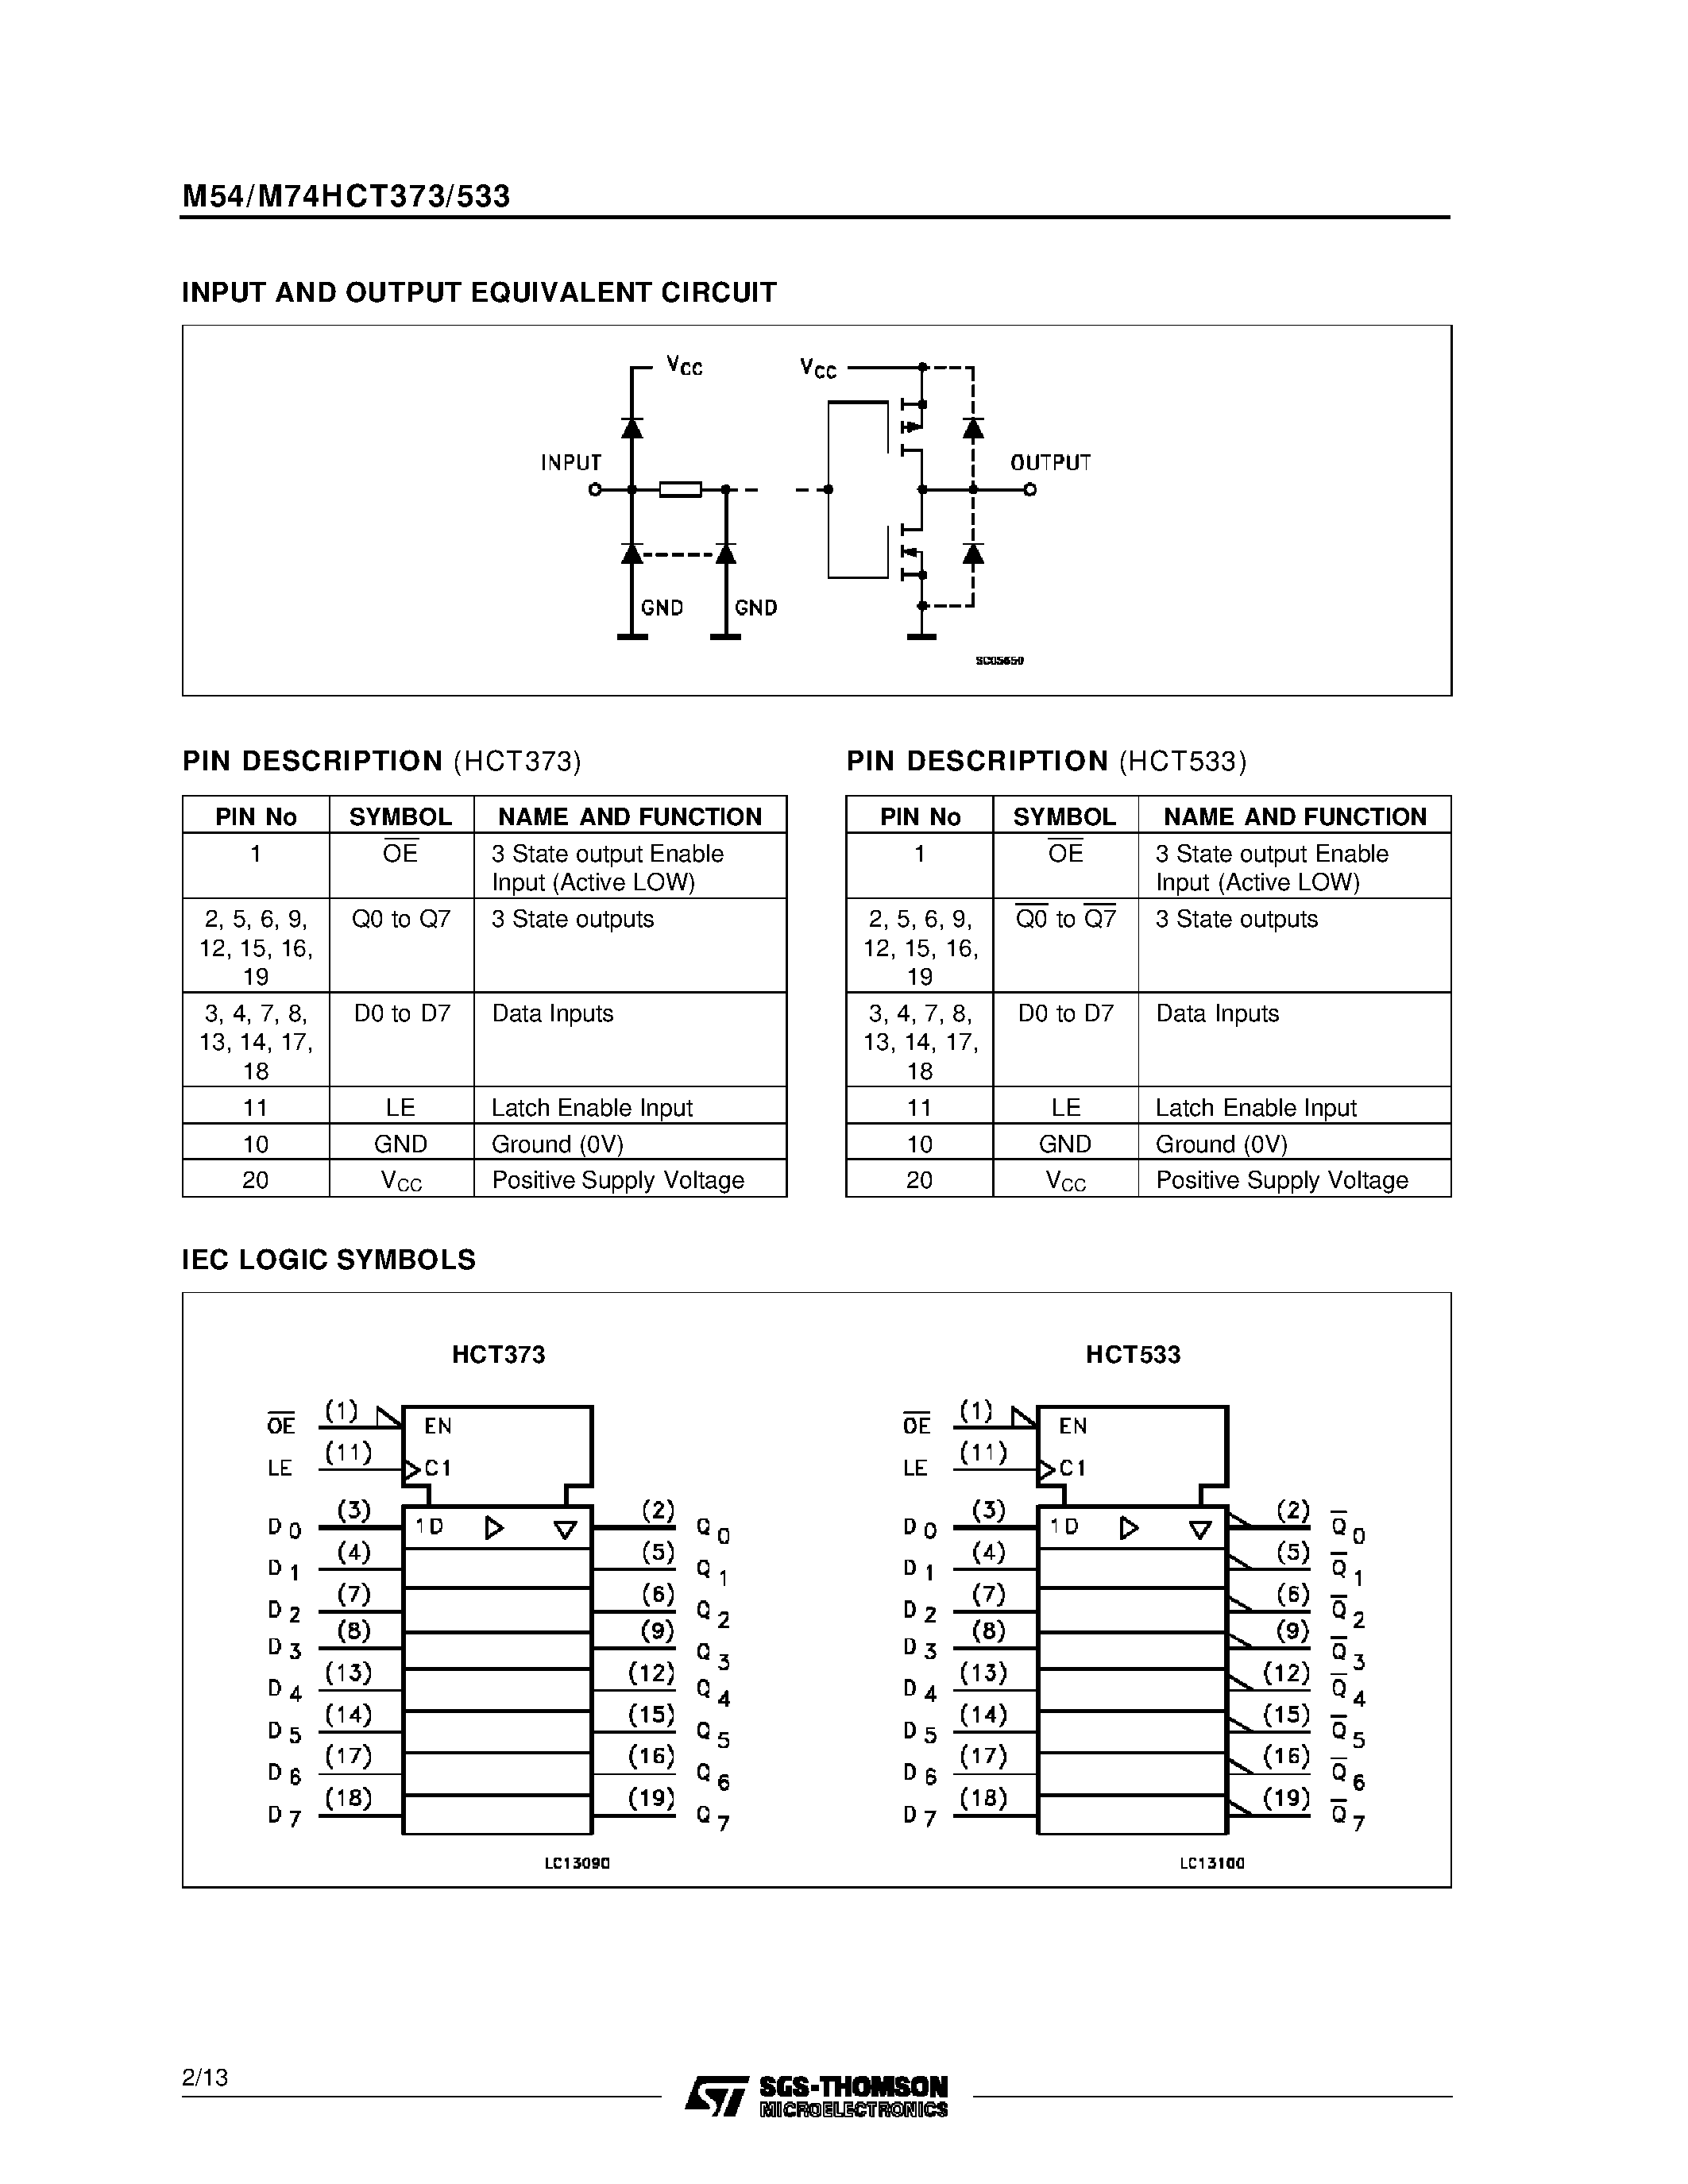 Datasheet M74HCT373 - OCTAL D-TYPE LATCH WITH 3 STATE OUTPUT HCT373 NON INVERTING - HCT533 INVERTING page 2